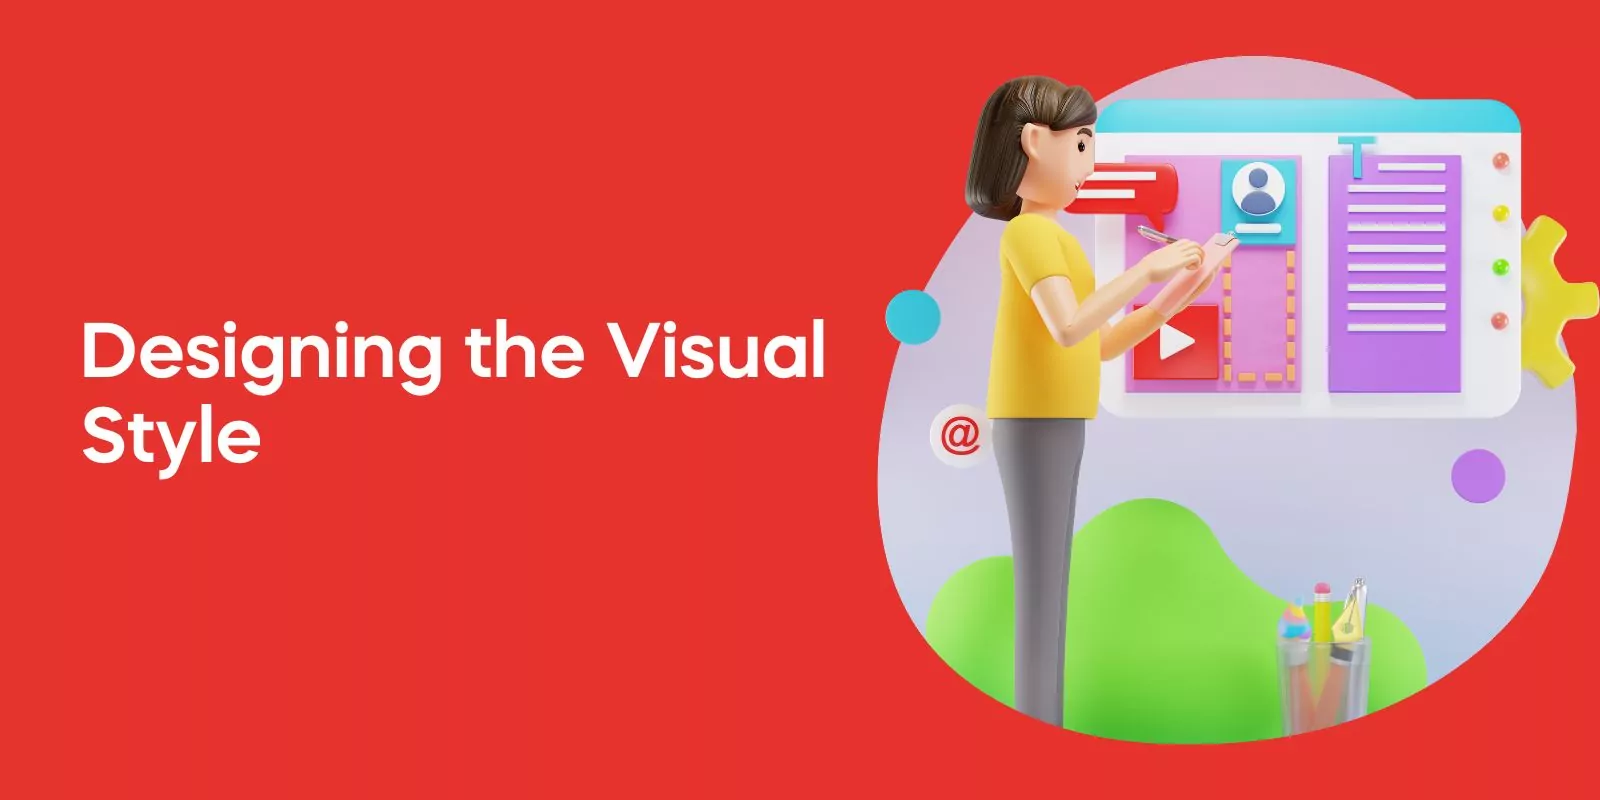 Designing the Visual Style